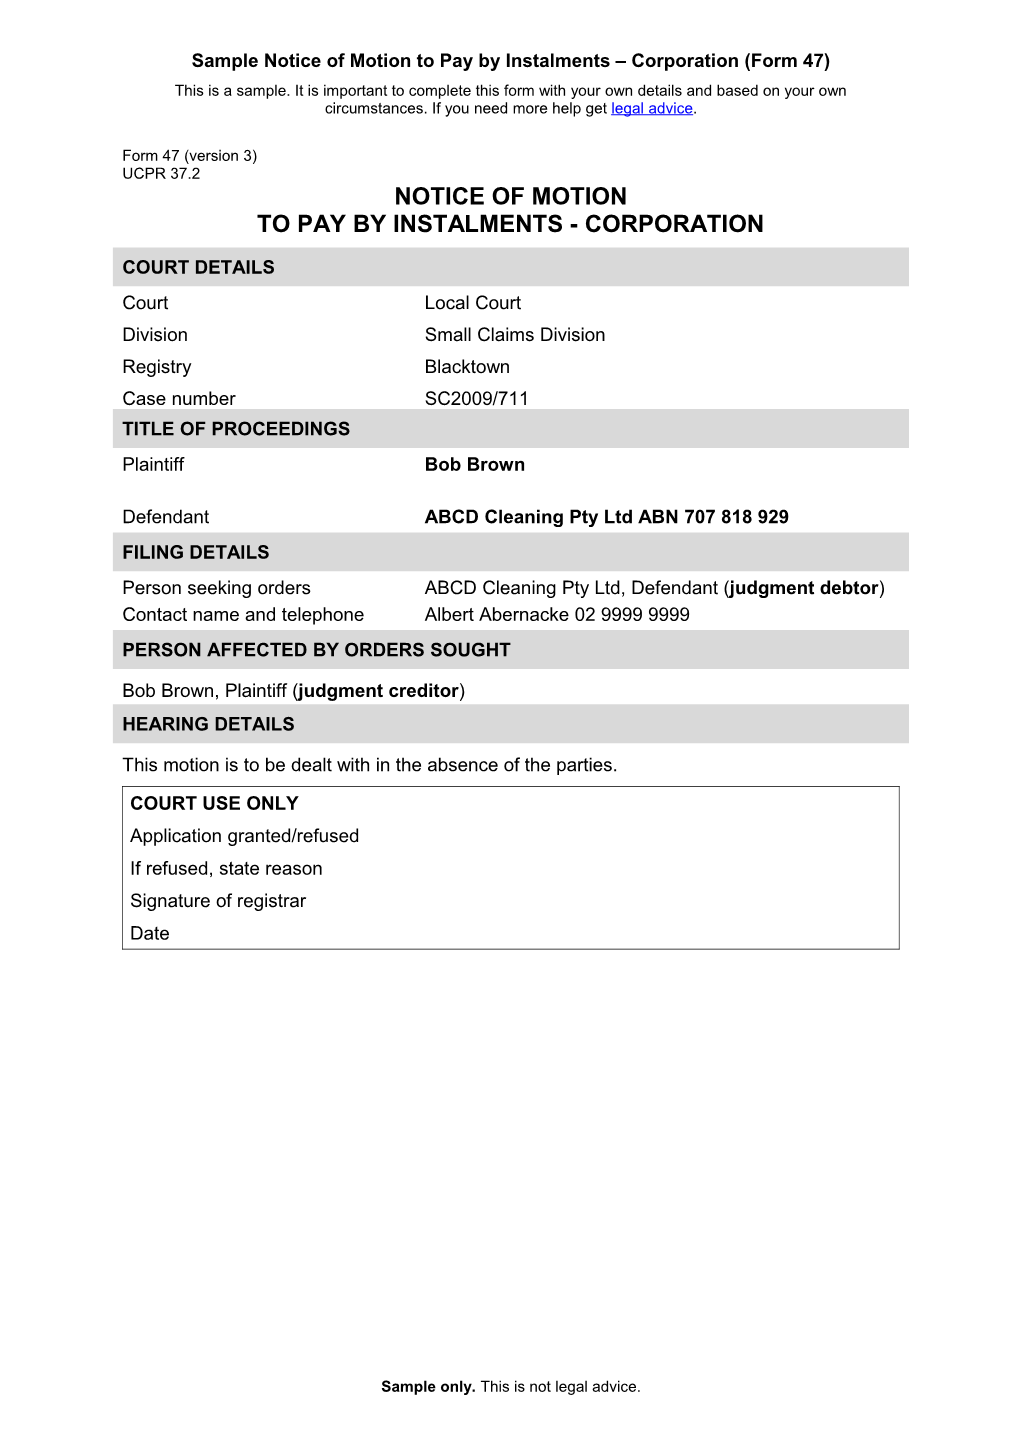 Form 47 - Notice of Motion to Pay by Instalments - Corporation